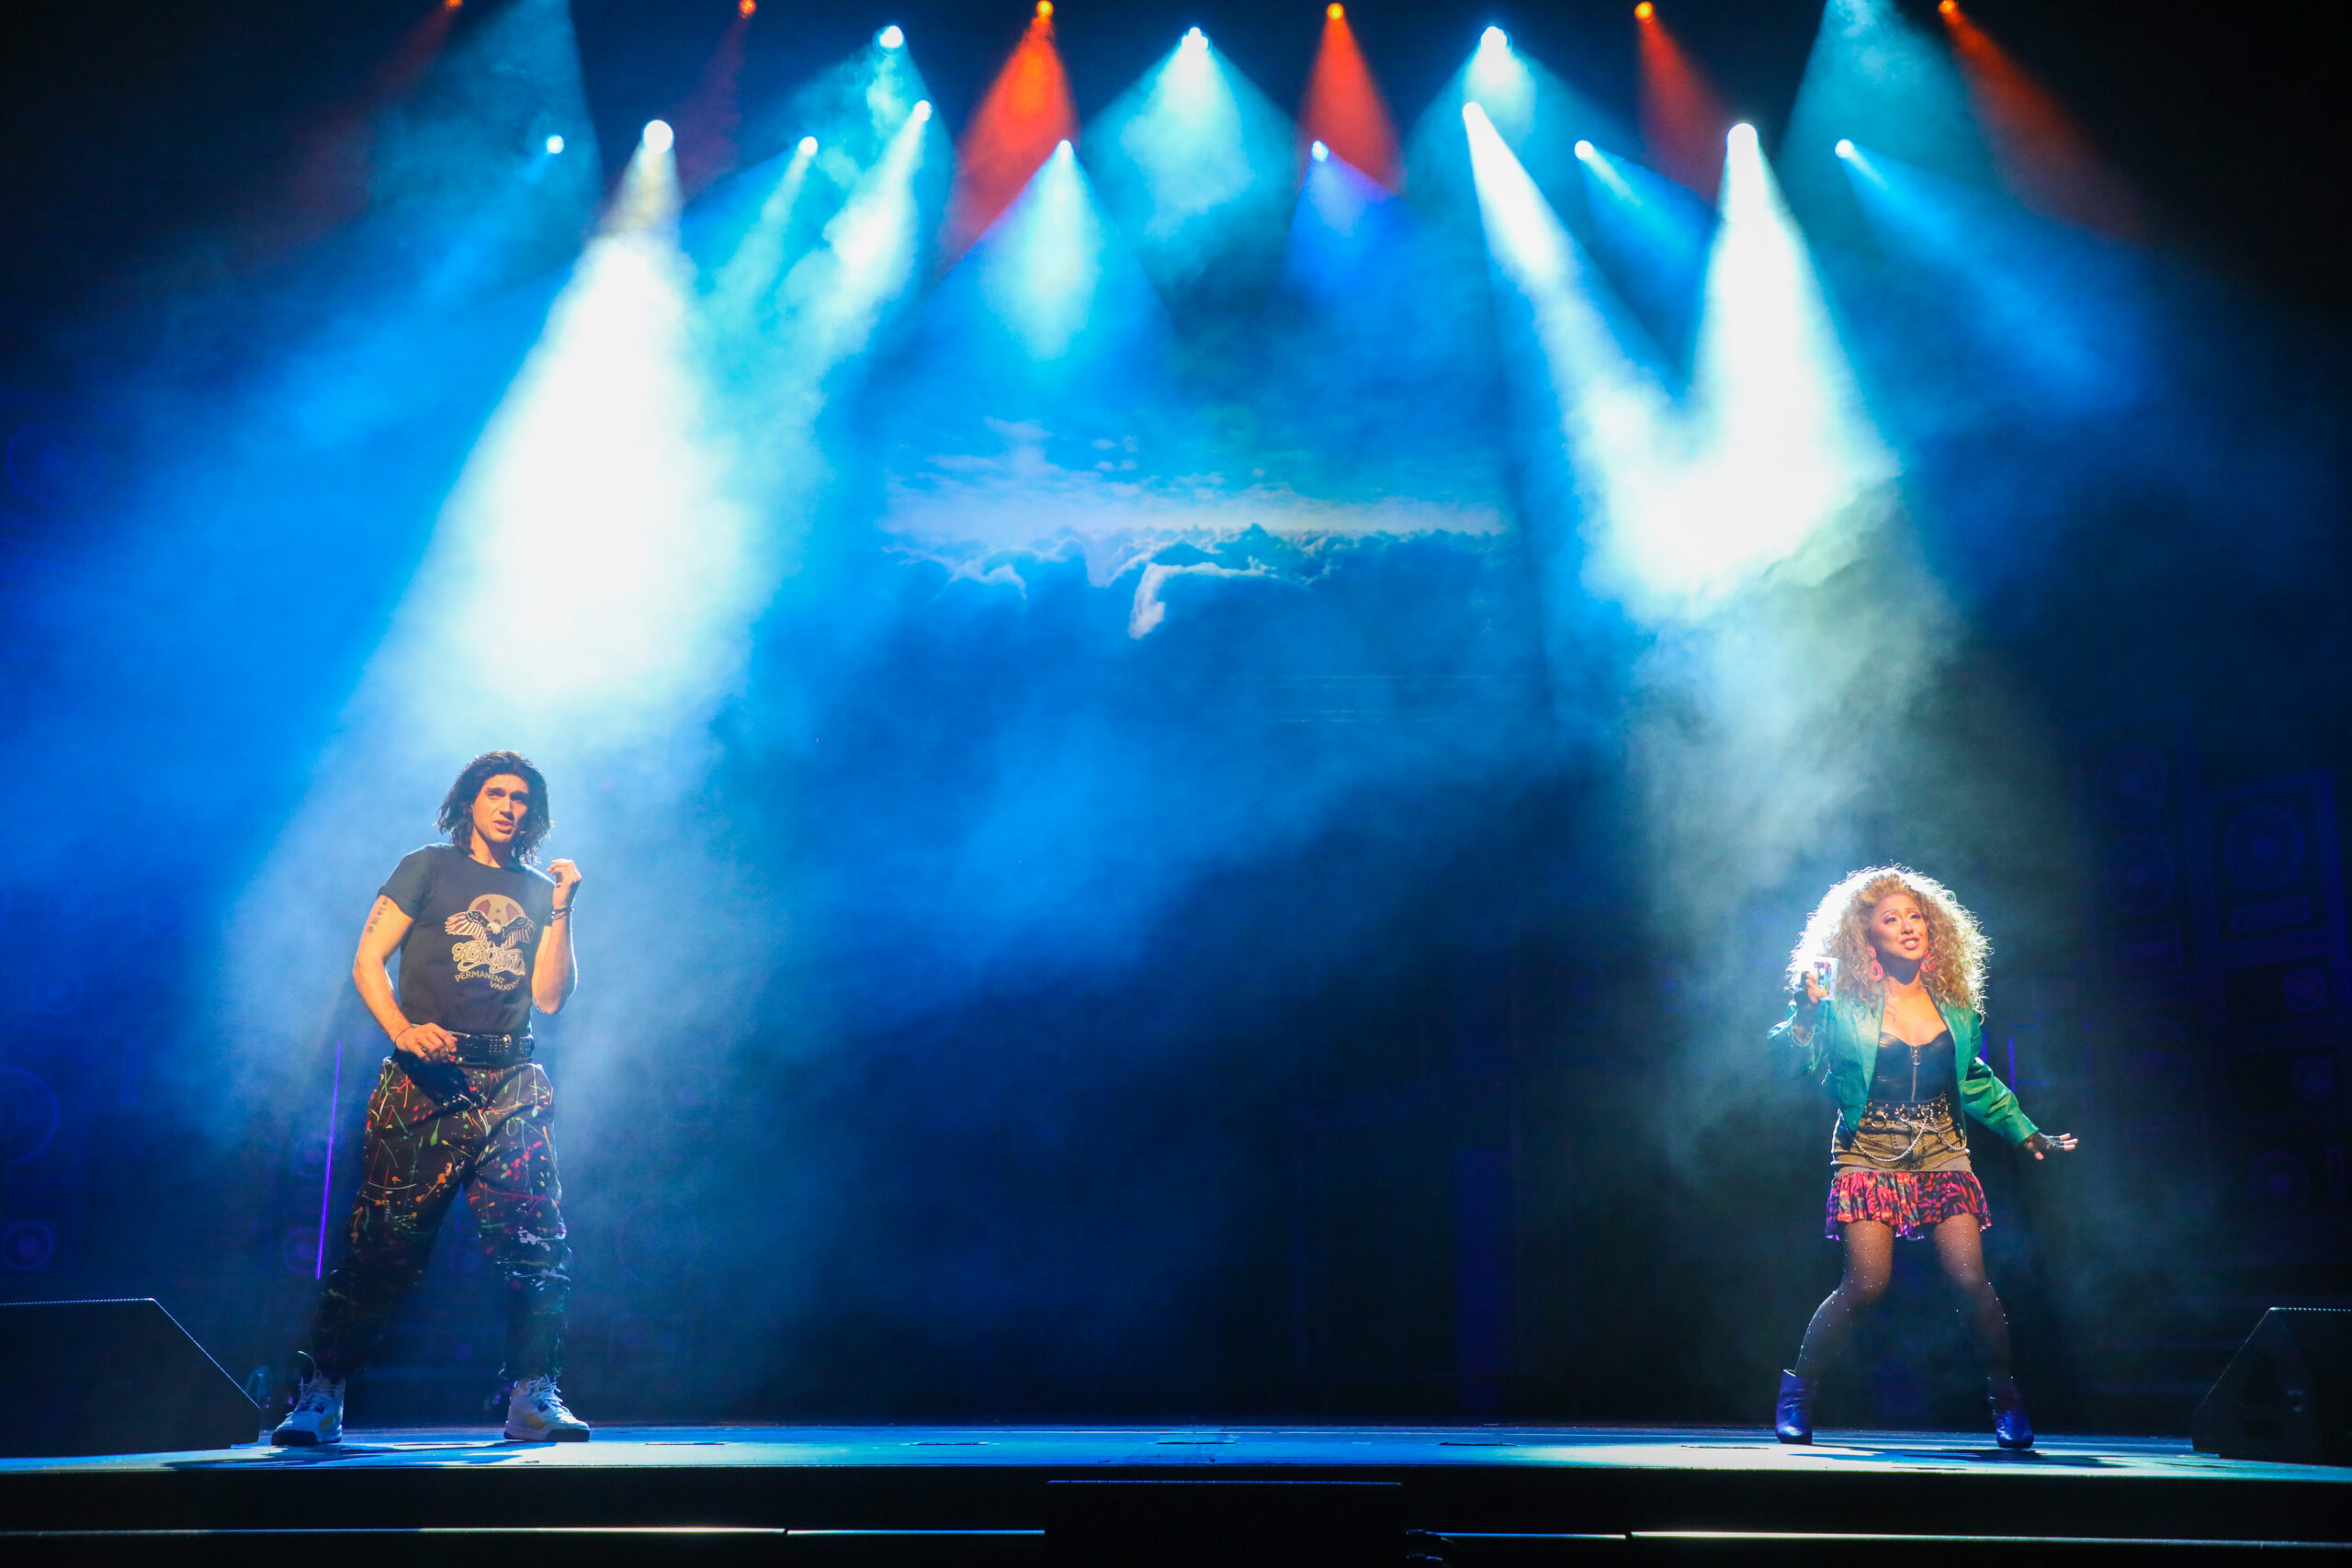 Rock of Ages, presented by Theatre Under the Stars - The Hobby Center